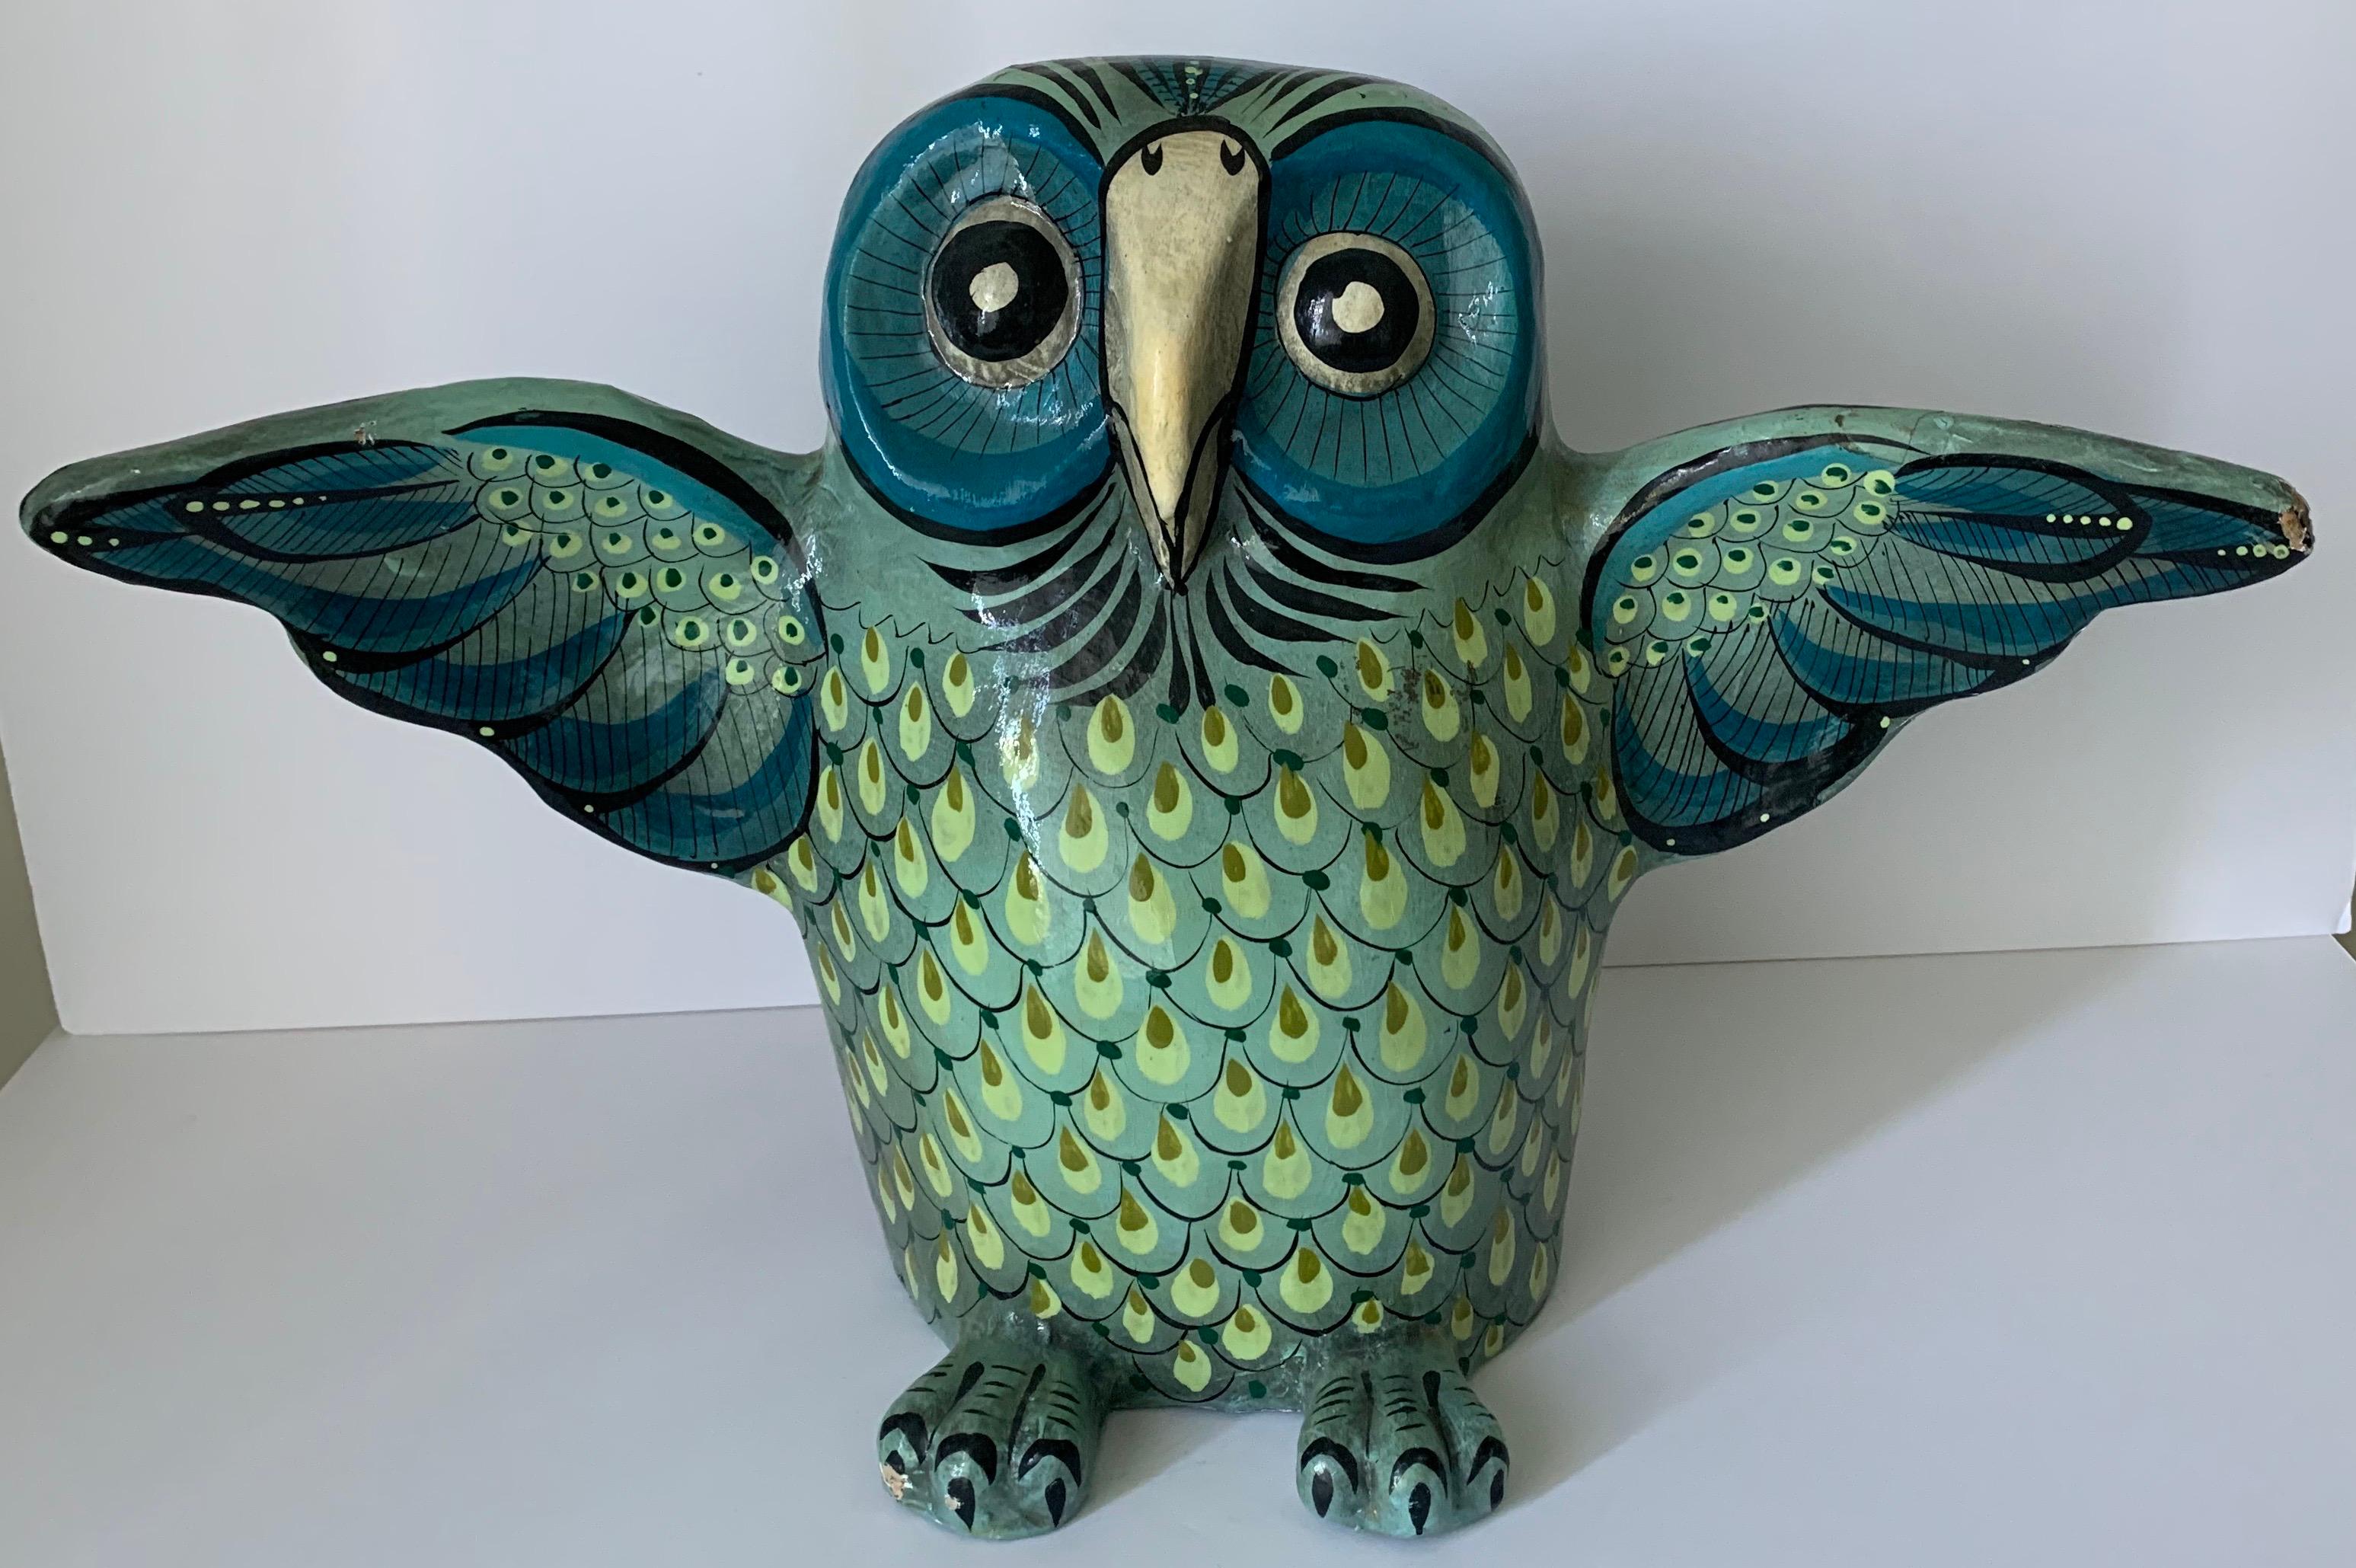 Papier mâché owl by Sermel. Hand painted design with overall areas of wear and minimal paint loss. Signed on the underside.